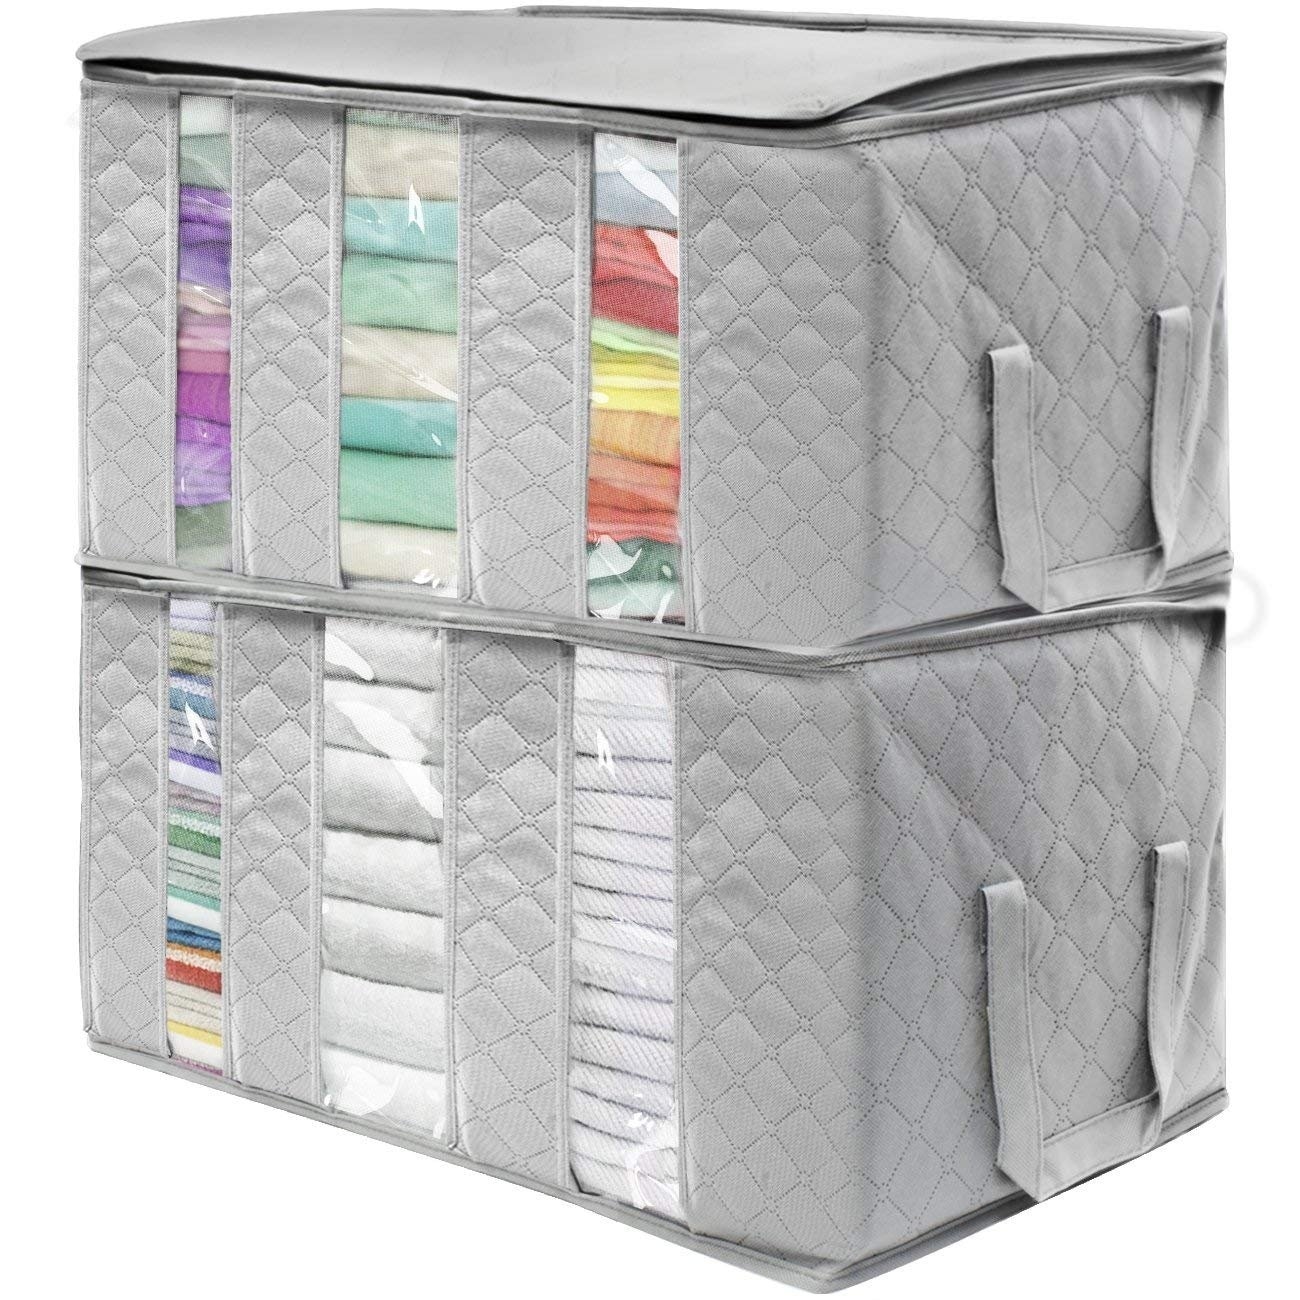 https://ak1.ostkcdn.com/images/products/is/images/direct/81366b0da55821561bbdb42798c32e4f821dee17/Foldable-Fabric-Storage-Organizer-Bag-3-Sectional-24x14x11in-%28Pack-of-2%2C-Grey%29.jpg